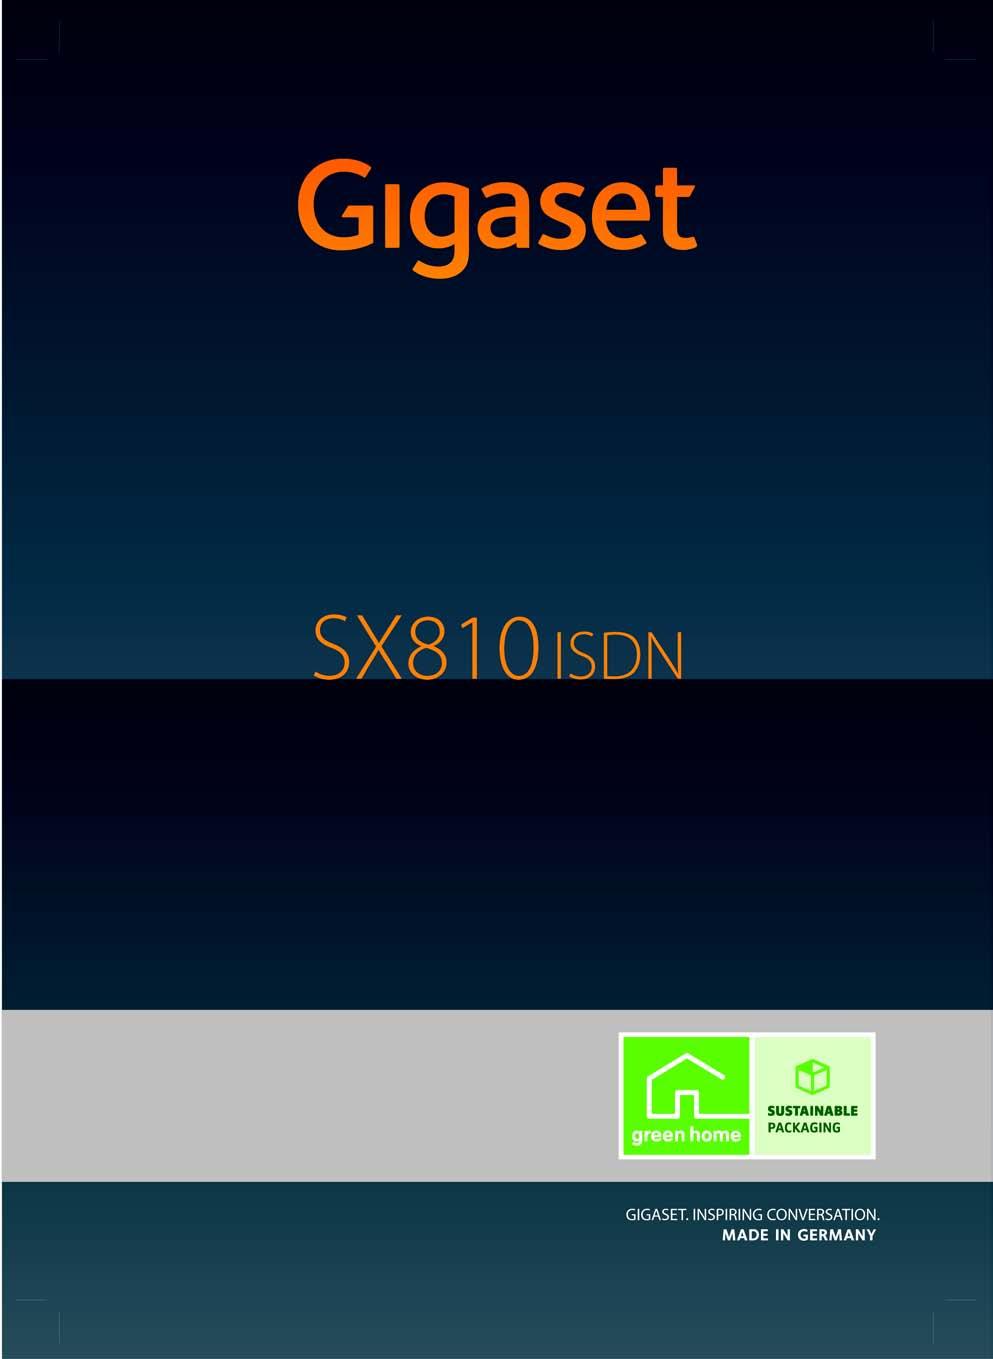 Congratulations By purchasing a Gigaset, you have chosen a brand that is fully committed to